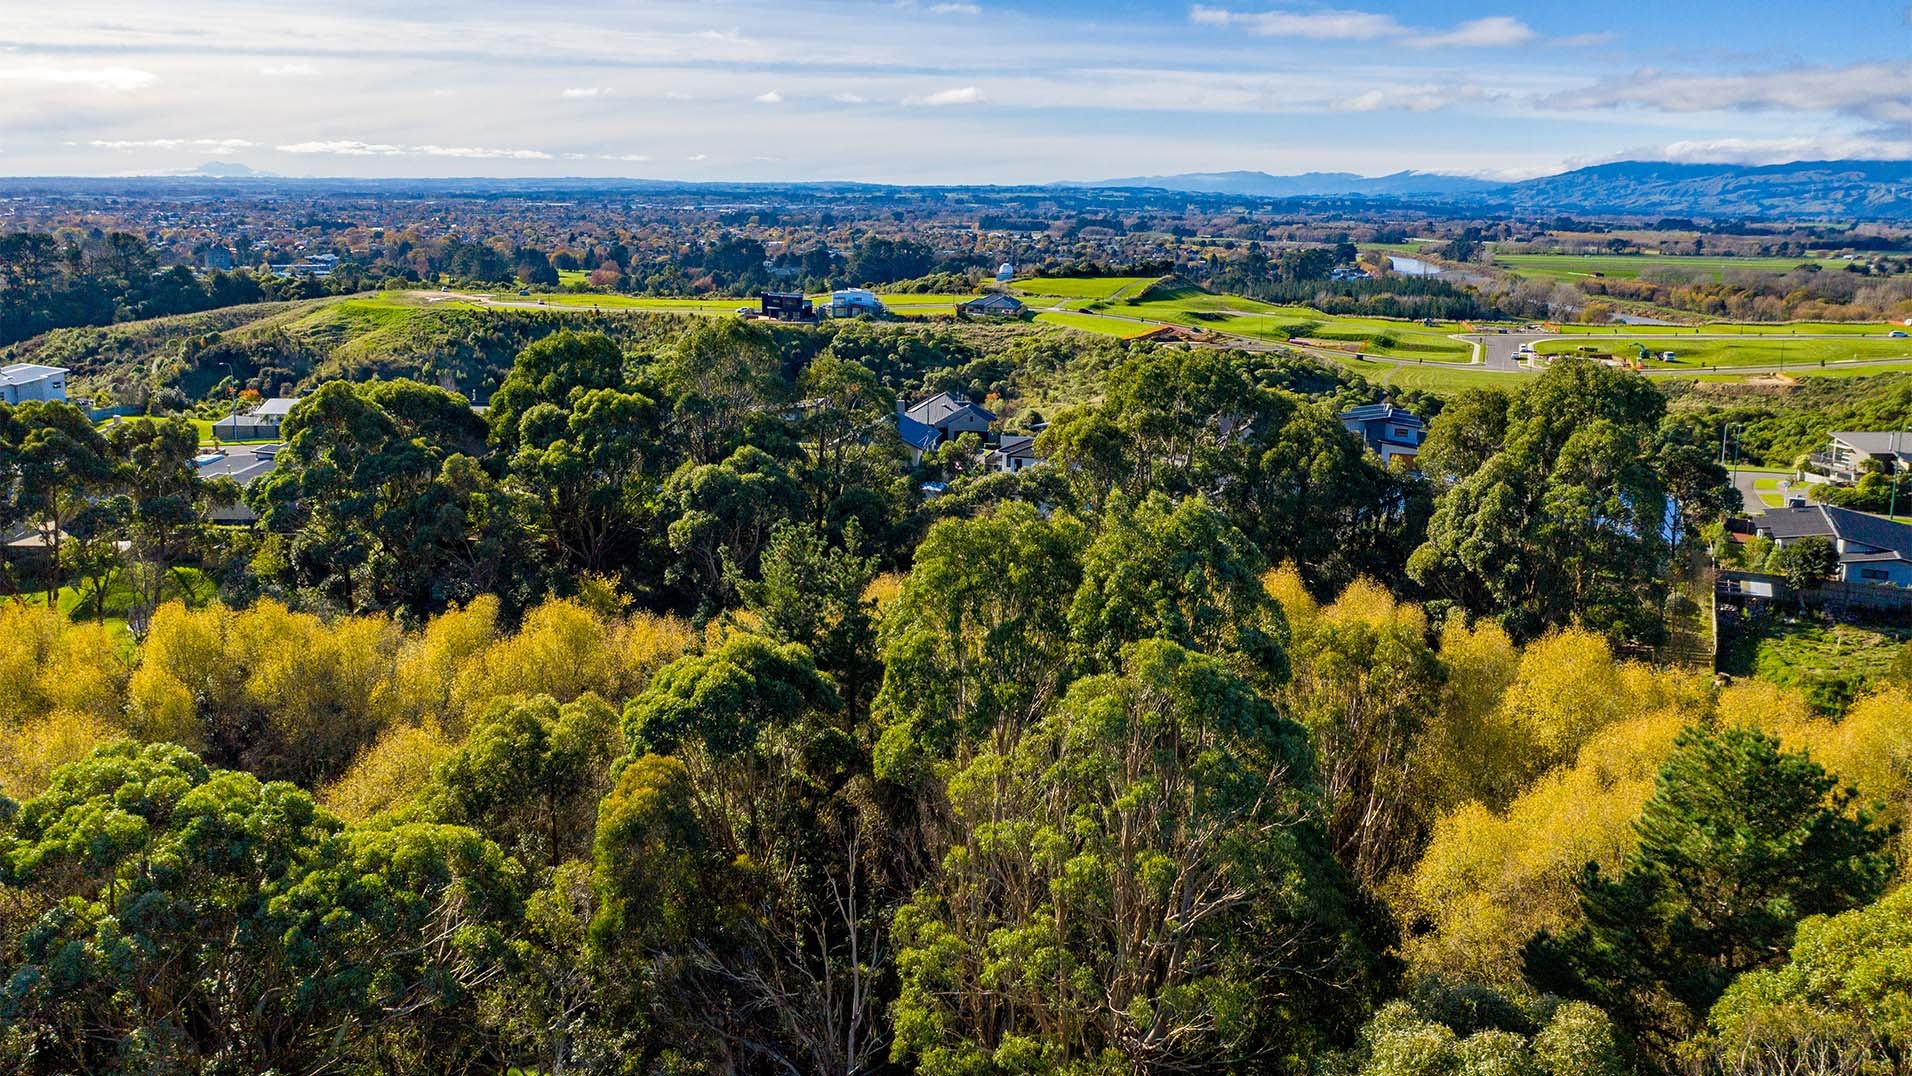 Photo shows birds-eye view of a heavily forested gully with the city stretching out in the distance.